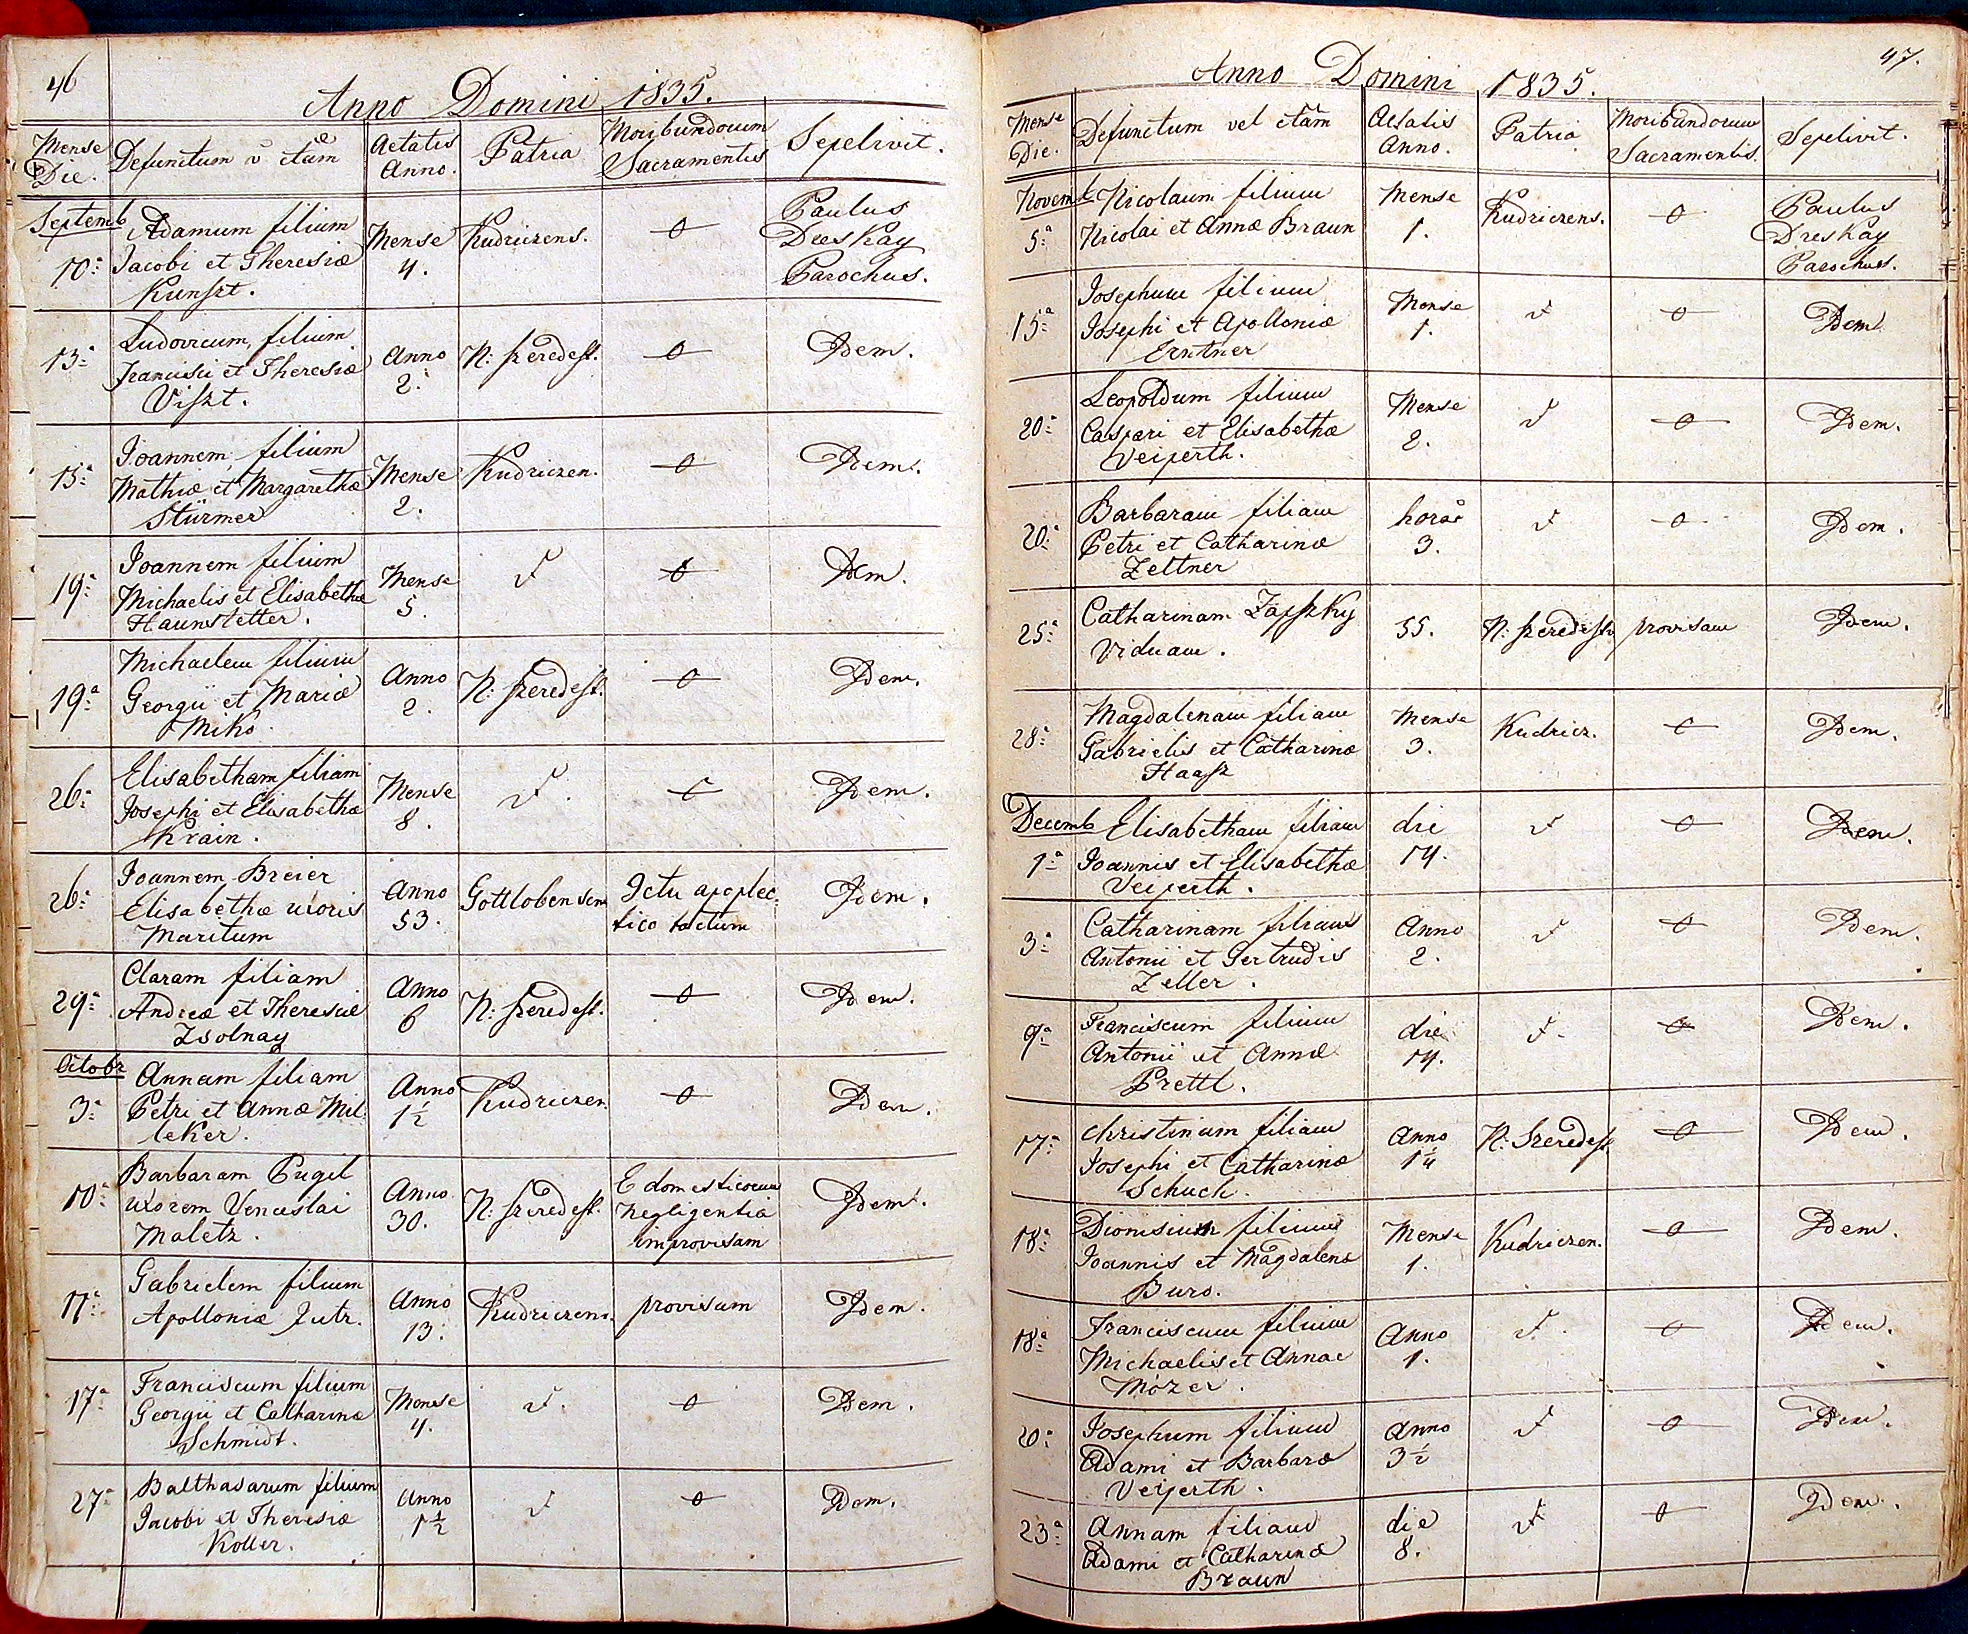 images/church_records/DEATHS/1829-1851D/046 i 047